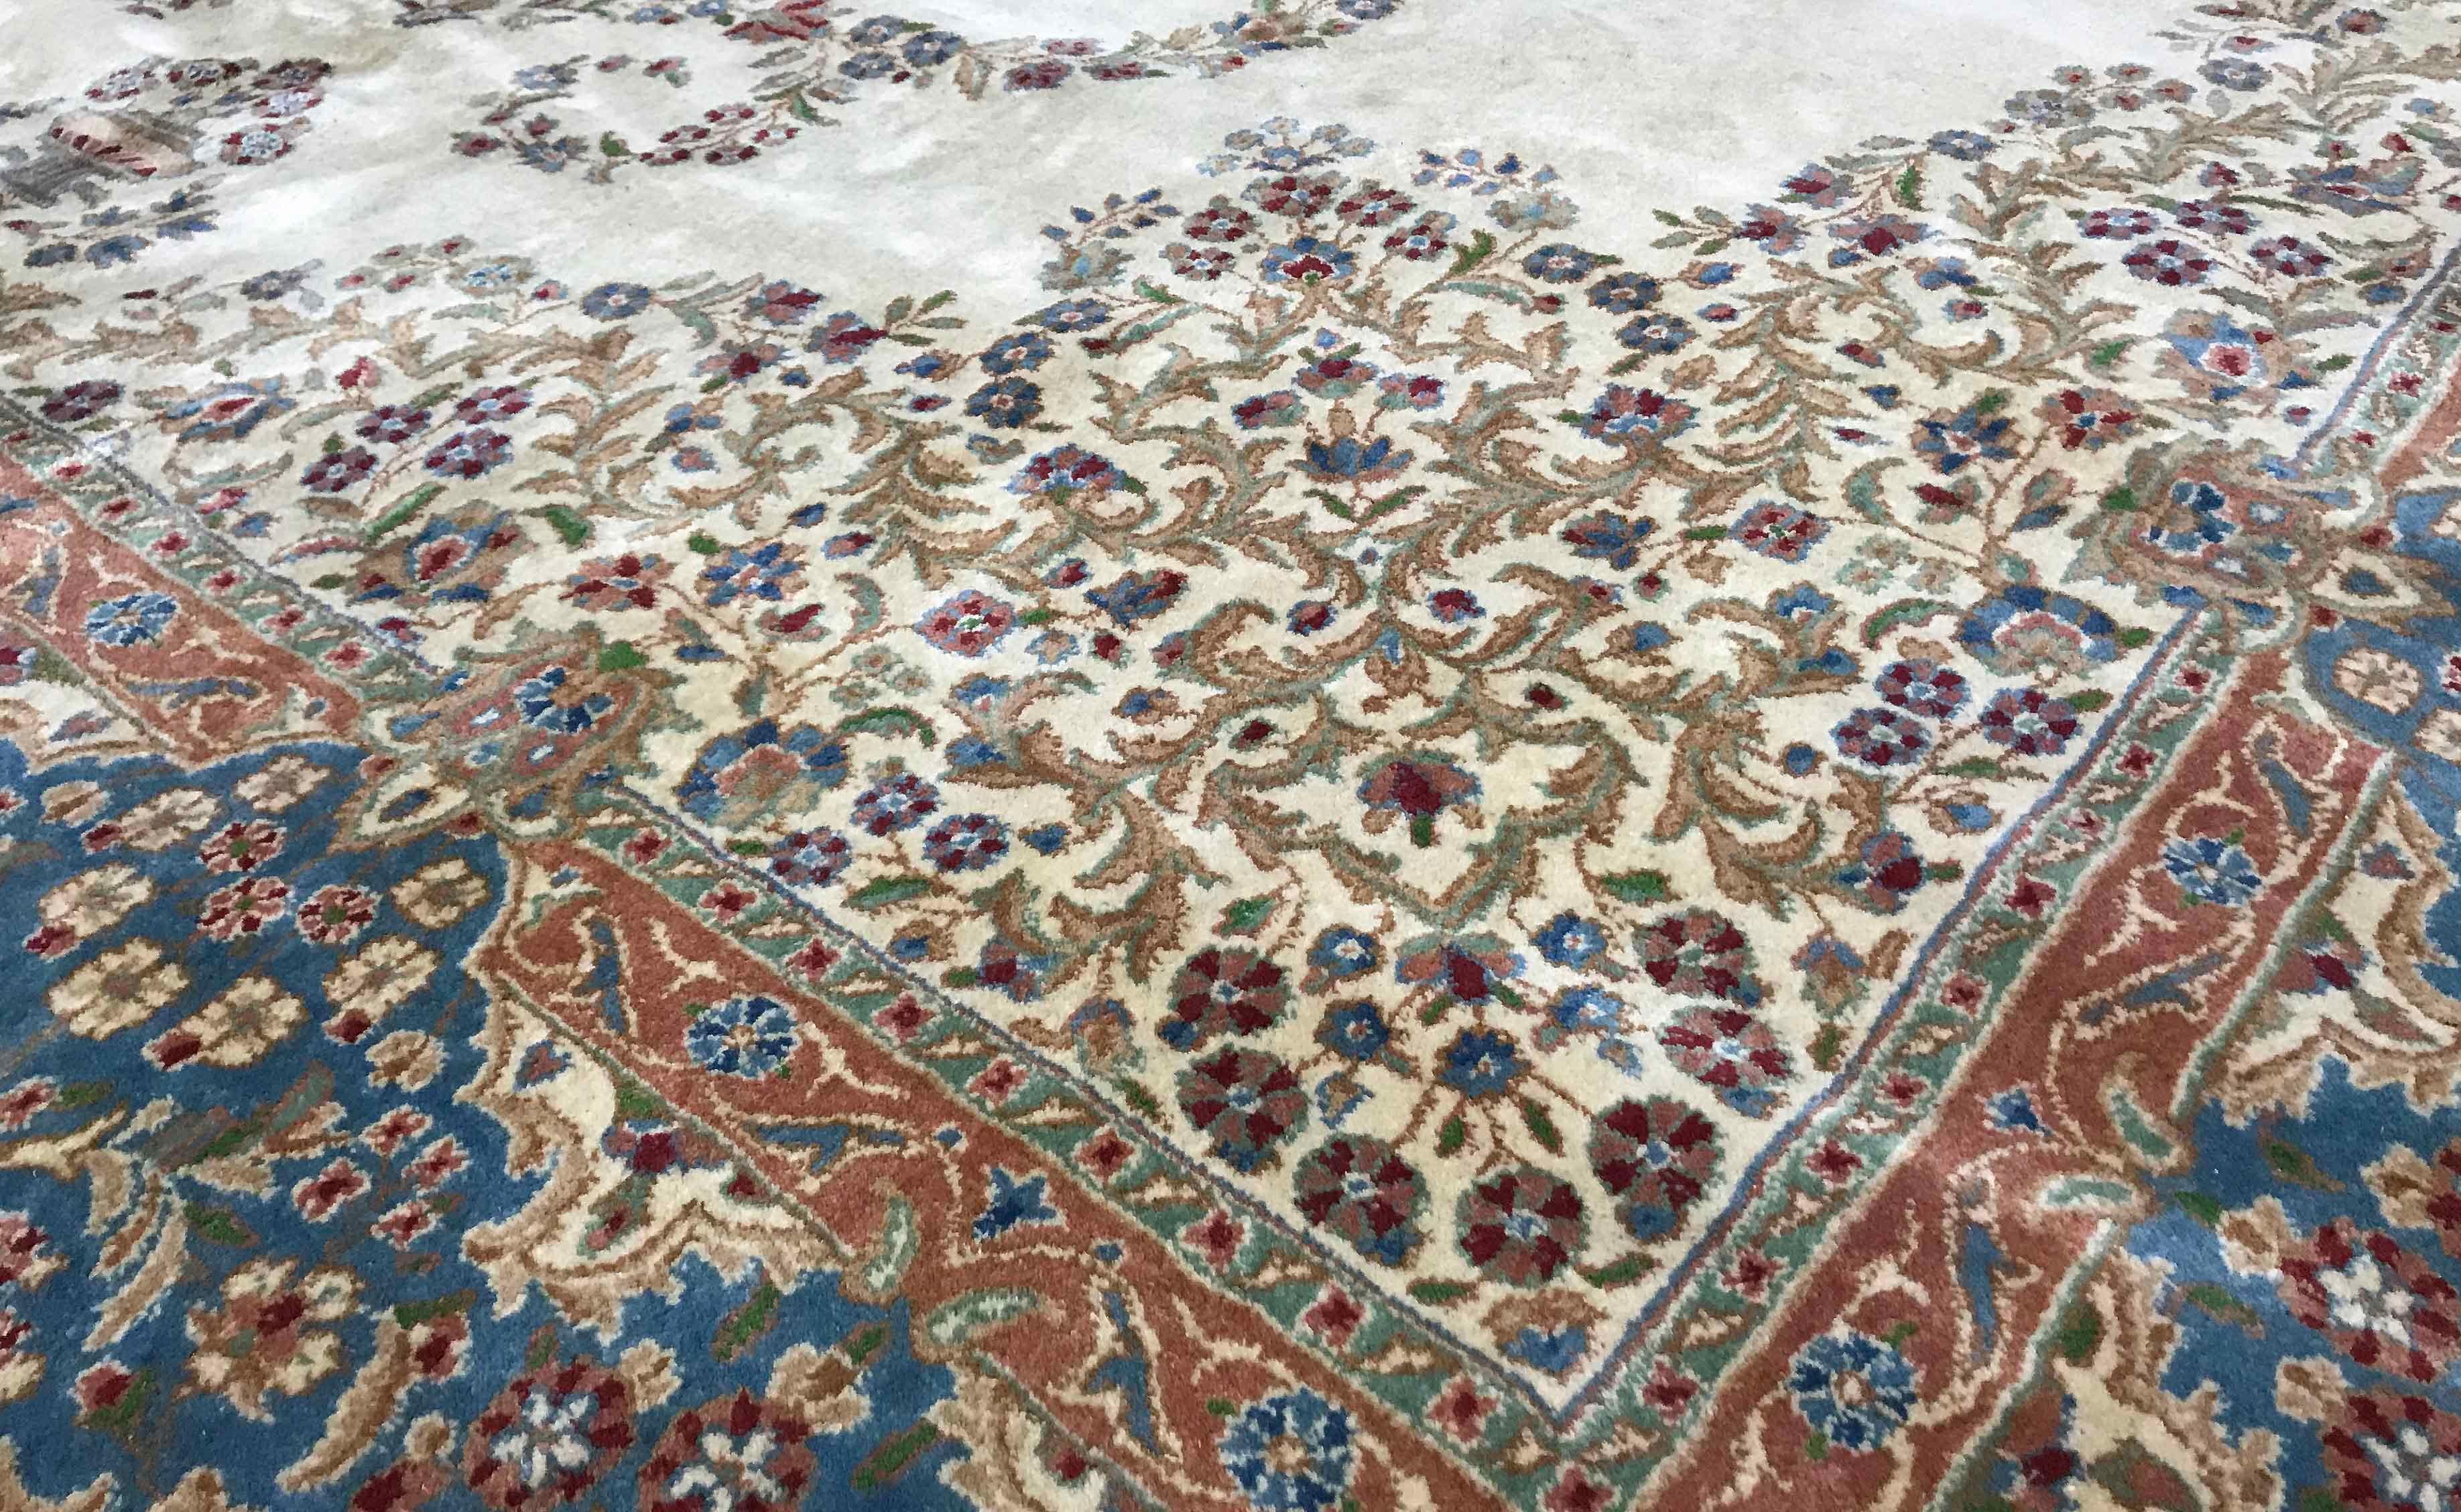 Vintage Persian Kerman rug, circa 1940. A wonderful design to this vintage 1940s Kerman rug, the central ivory field enclosing a soft blue floral themed medallion surrounded by swirls of detailed floriated patterns and then repeated in the